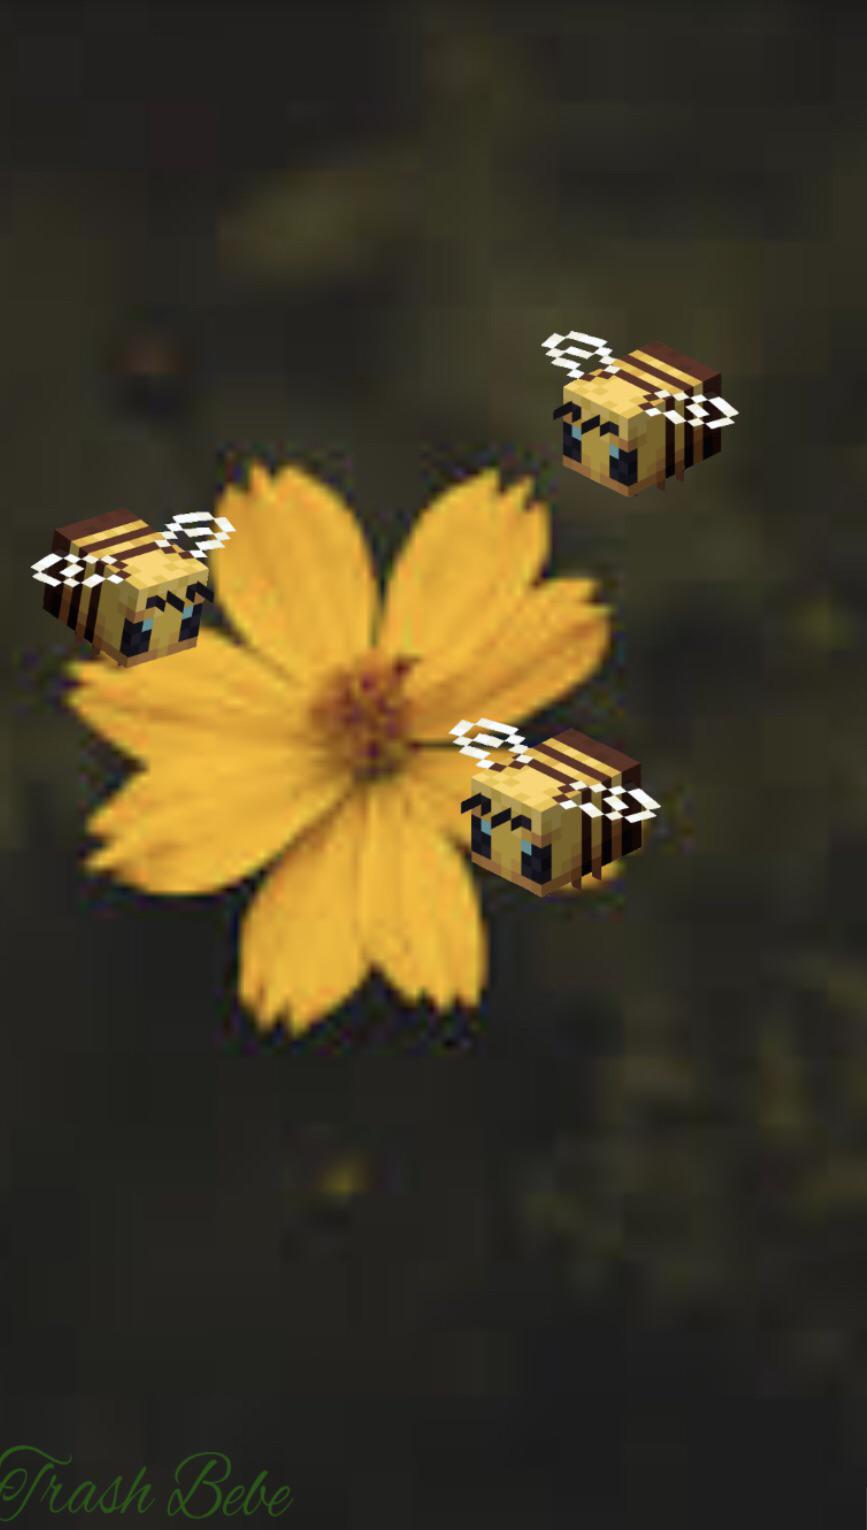 A yellow flower floating in water with bees - Bee